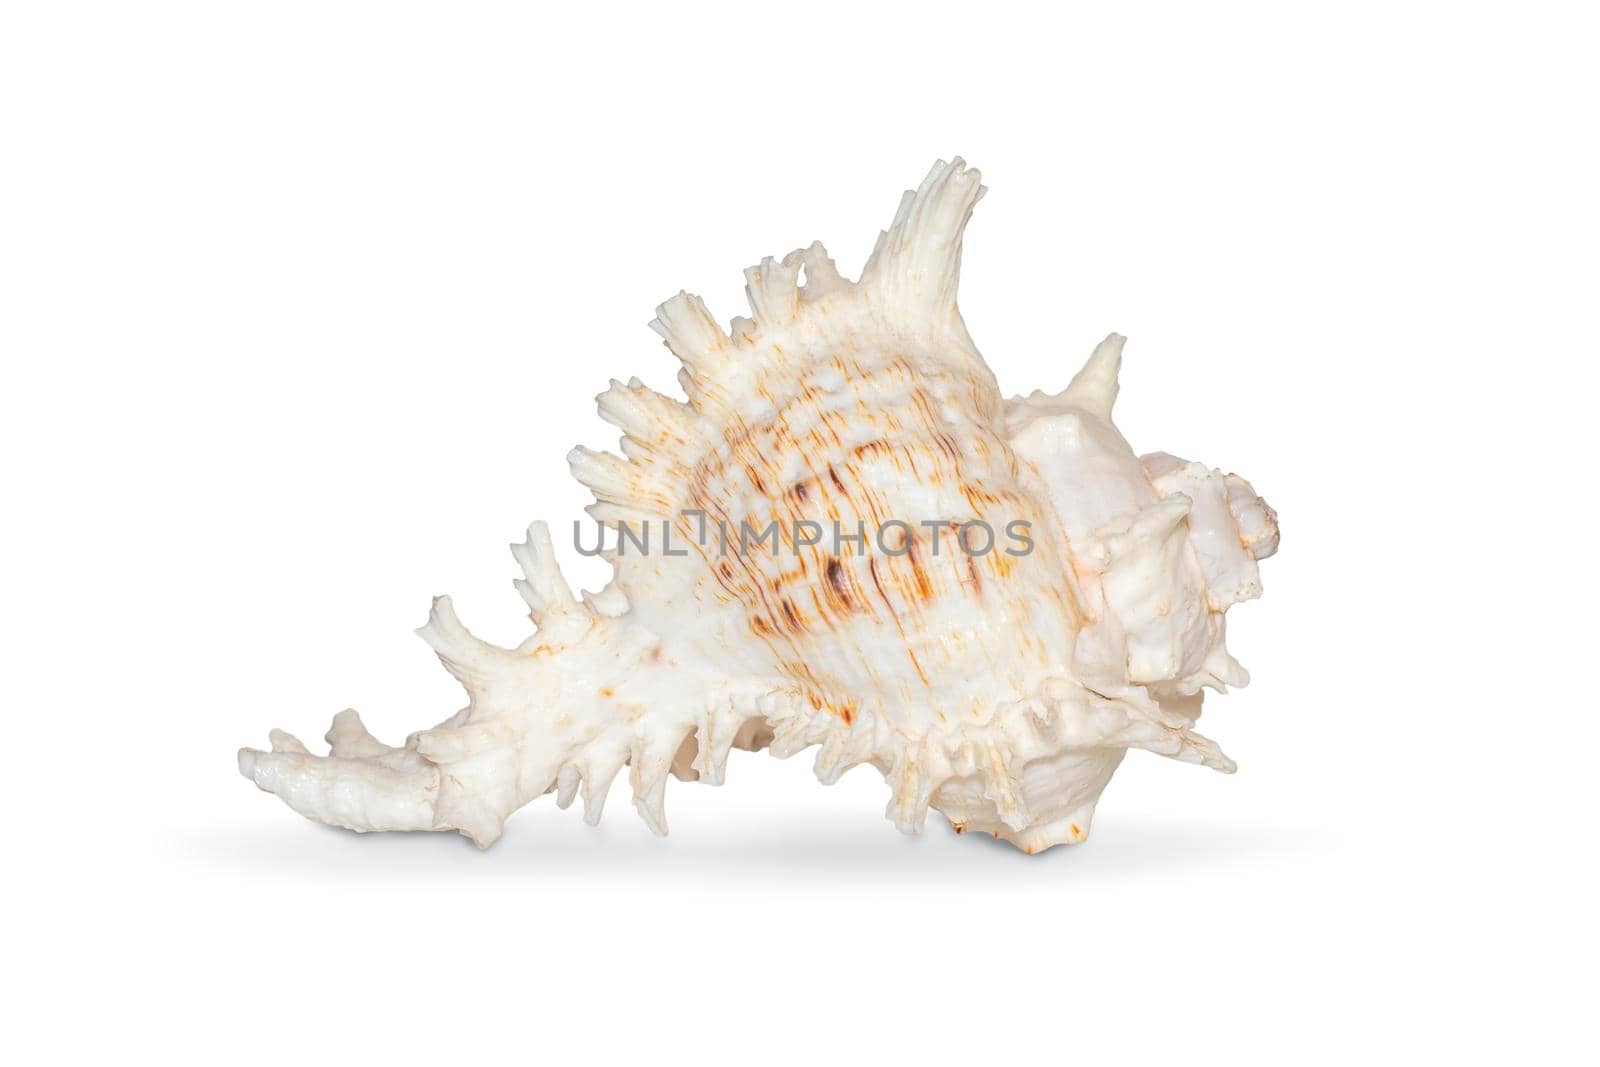 Image of natural large conch shell kirin snail thousands on a white background. Undersea Animals. Sea shells.